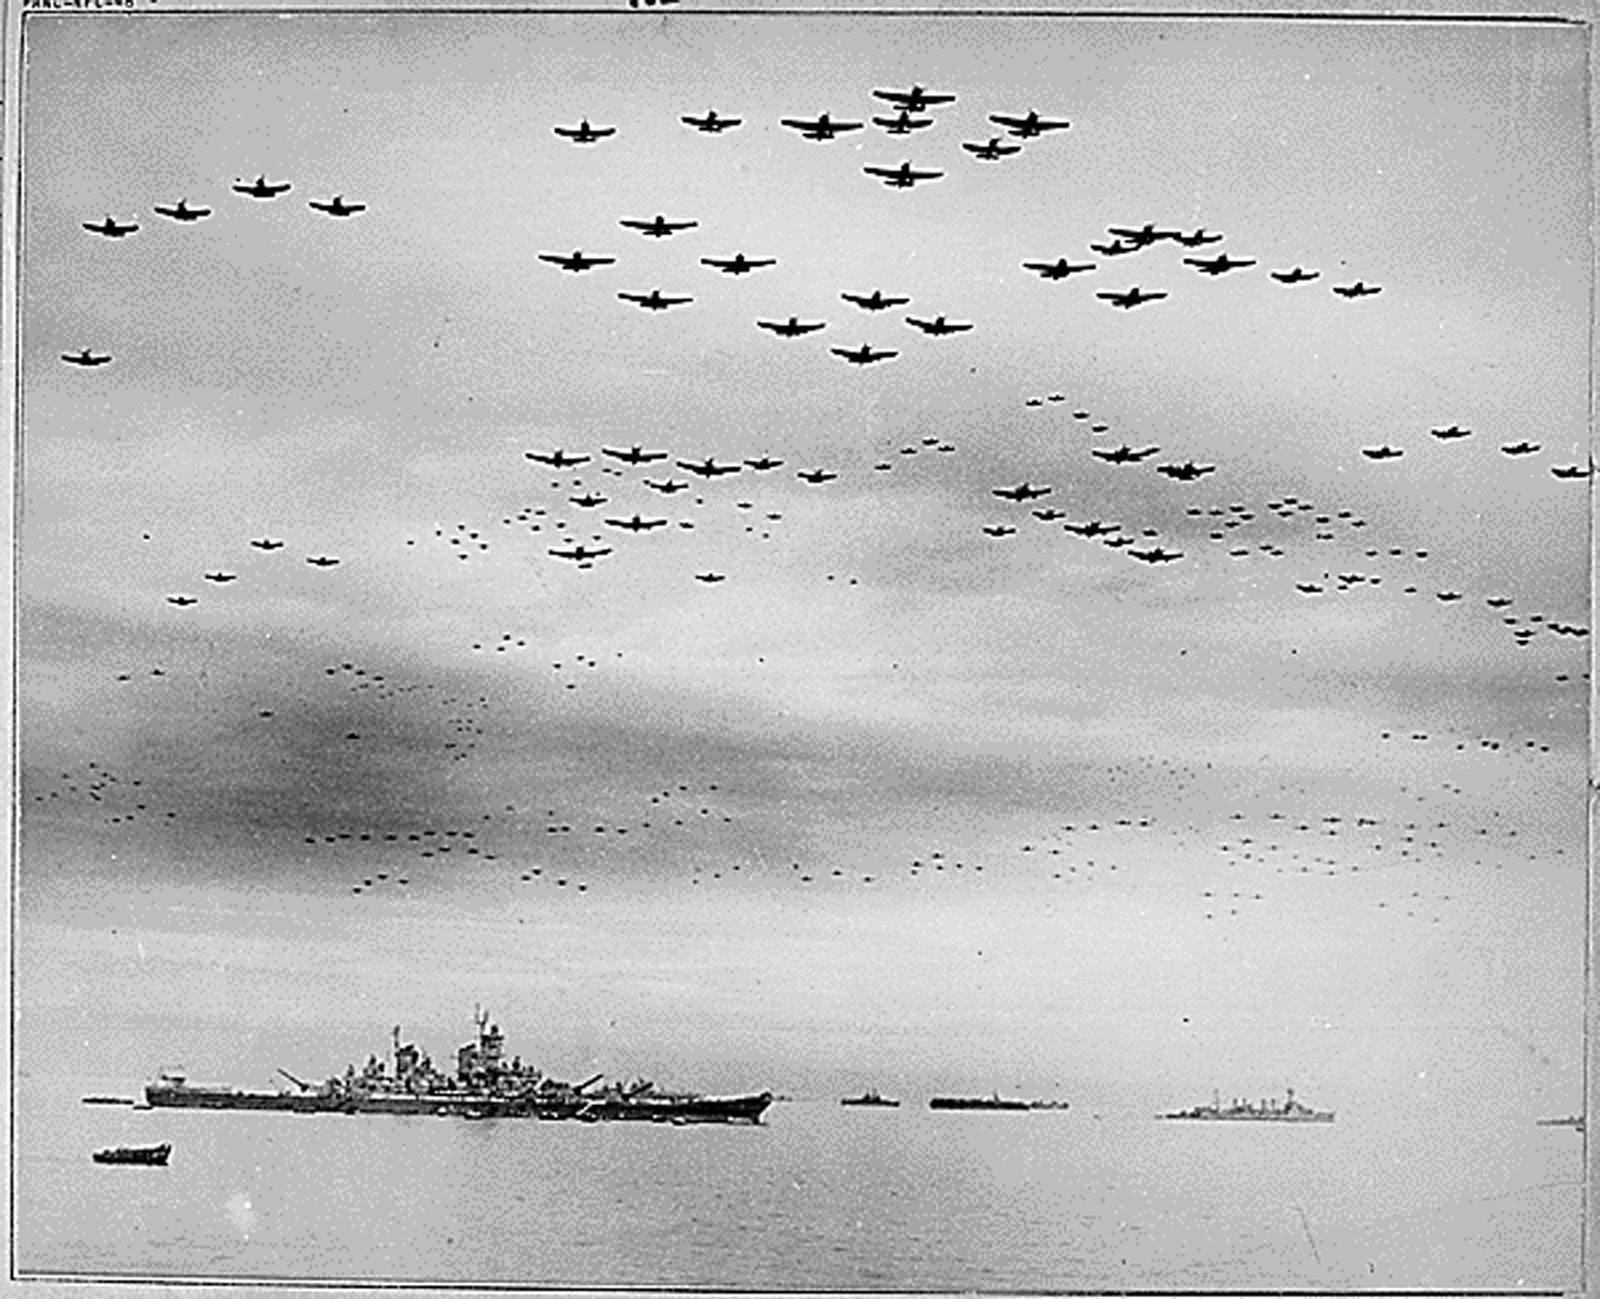 epa04867684 A handout image made available by the US National Archives and Records Administration (NARA) of US Vought F4U Corsair and Grumman F6F Hellcat aircrafts flting in formation over USS Missouri during surrender ceremonies near Tokyo, Japan, 02 September 1945. 06 August 2015 marks the 70th anniversary of the atomic bombing on Hiroshima. The US B-29 Superfortress bomber Enola Gay dropped an atomic bomb codenamed 'Little Boy' on Hiroshima on 06 August 1945, killing tens of thousands of people in seconds. By the end of the year, 140,000 people had died from the effects of the bomb. On 09 August 1945 a second atomic bomb was exploded over Nagasaki, killing more than 73,000 people. The 'Little Boy' was the first ever nuclear bomb dropped on a city and a crucial turn that led to Japan's surrender in WWII.  EPA/US NATIONAL ARCHIVES / HANDOUT  HANDOUT EDITORIAL USE ONLY